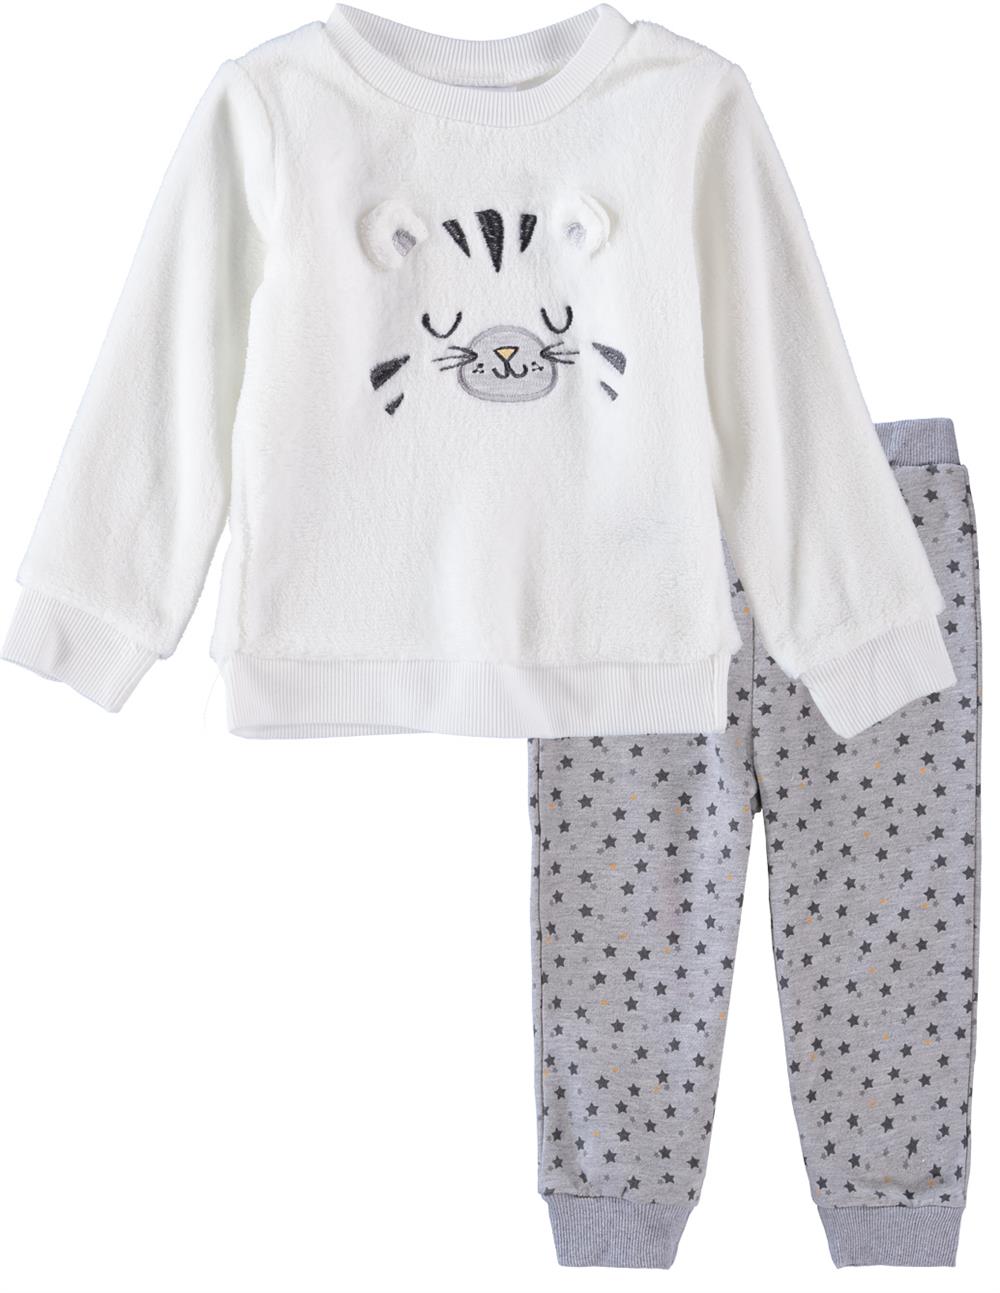 Emporio Baby 12-24 Months 2-Piece Faux Fur Top and Pants Set